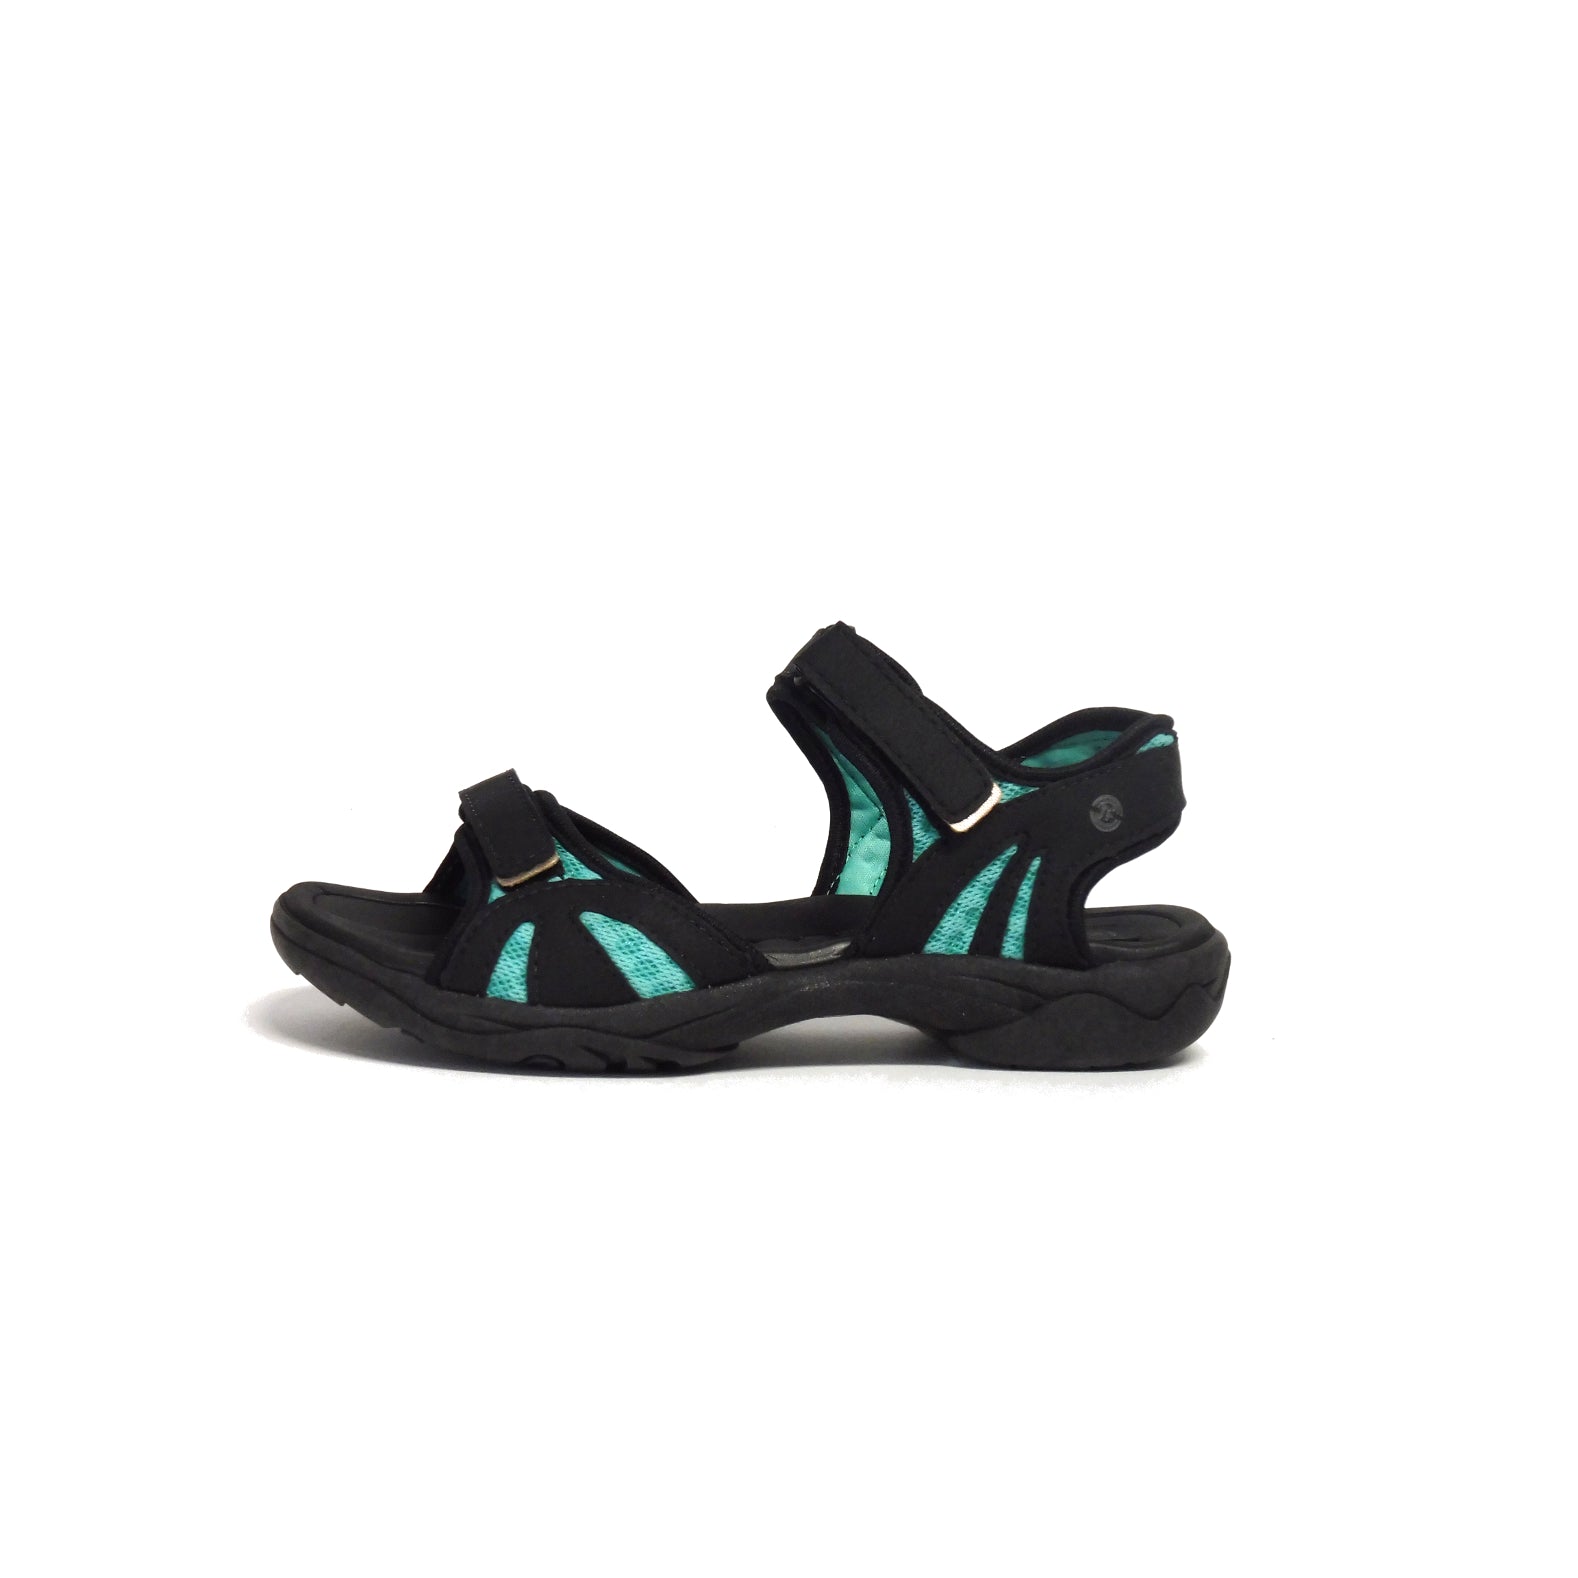 New Face 01 Black/Turquoise (size 37) ONLINE ONLY – Lace Ups